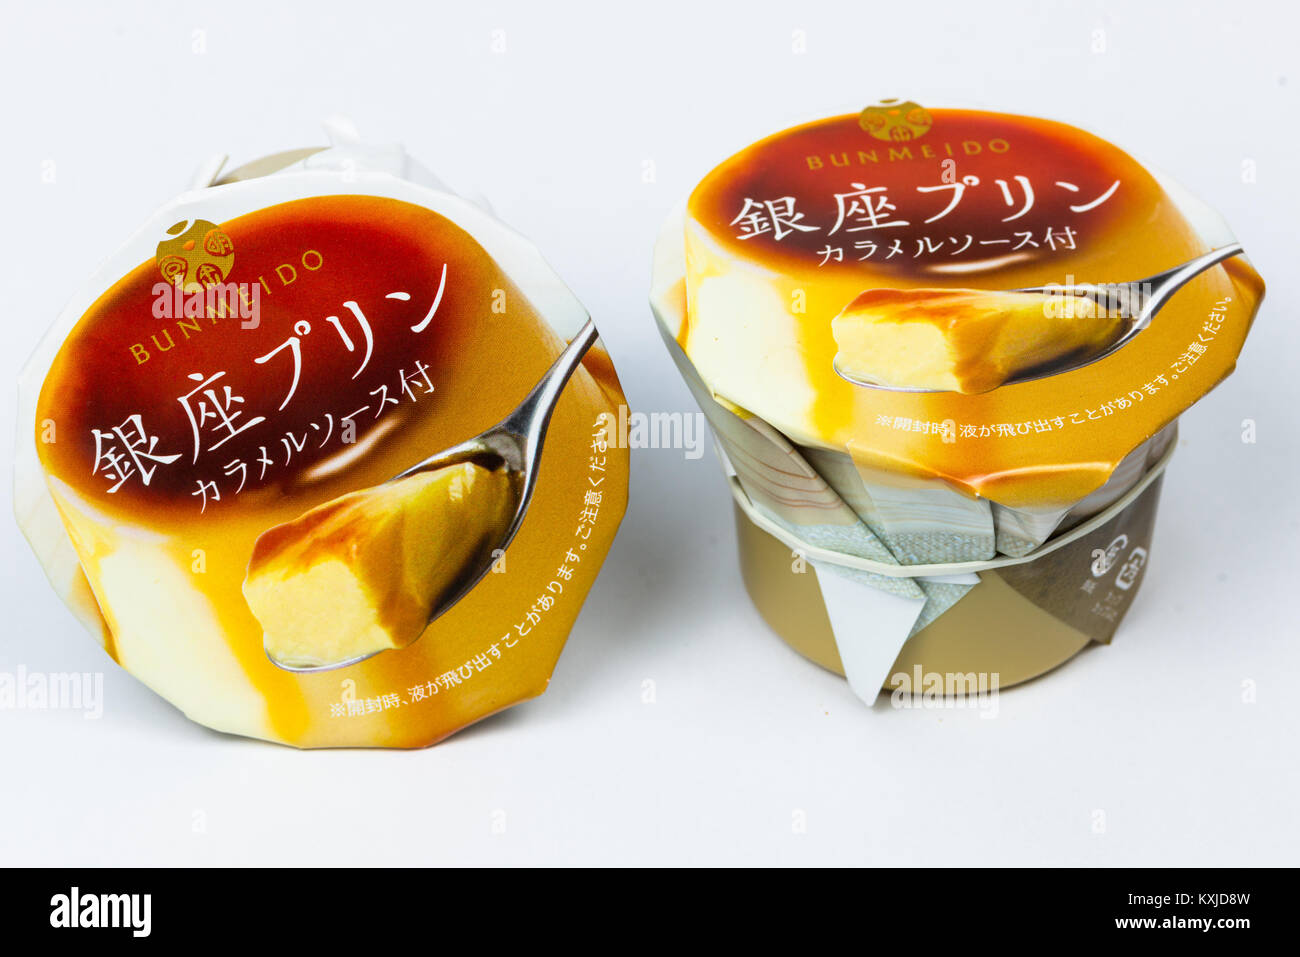 Japanese Pudding “Purin” by Bunmeido is a custard dessert with a layer of  soft caramel on top. Shown here on a white background Stock Photo - Alamy